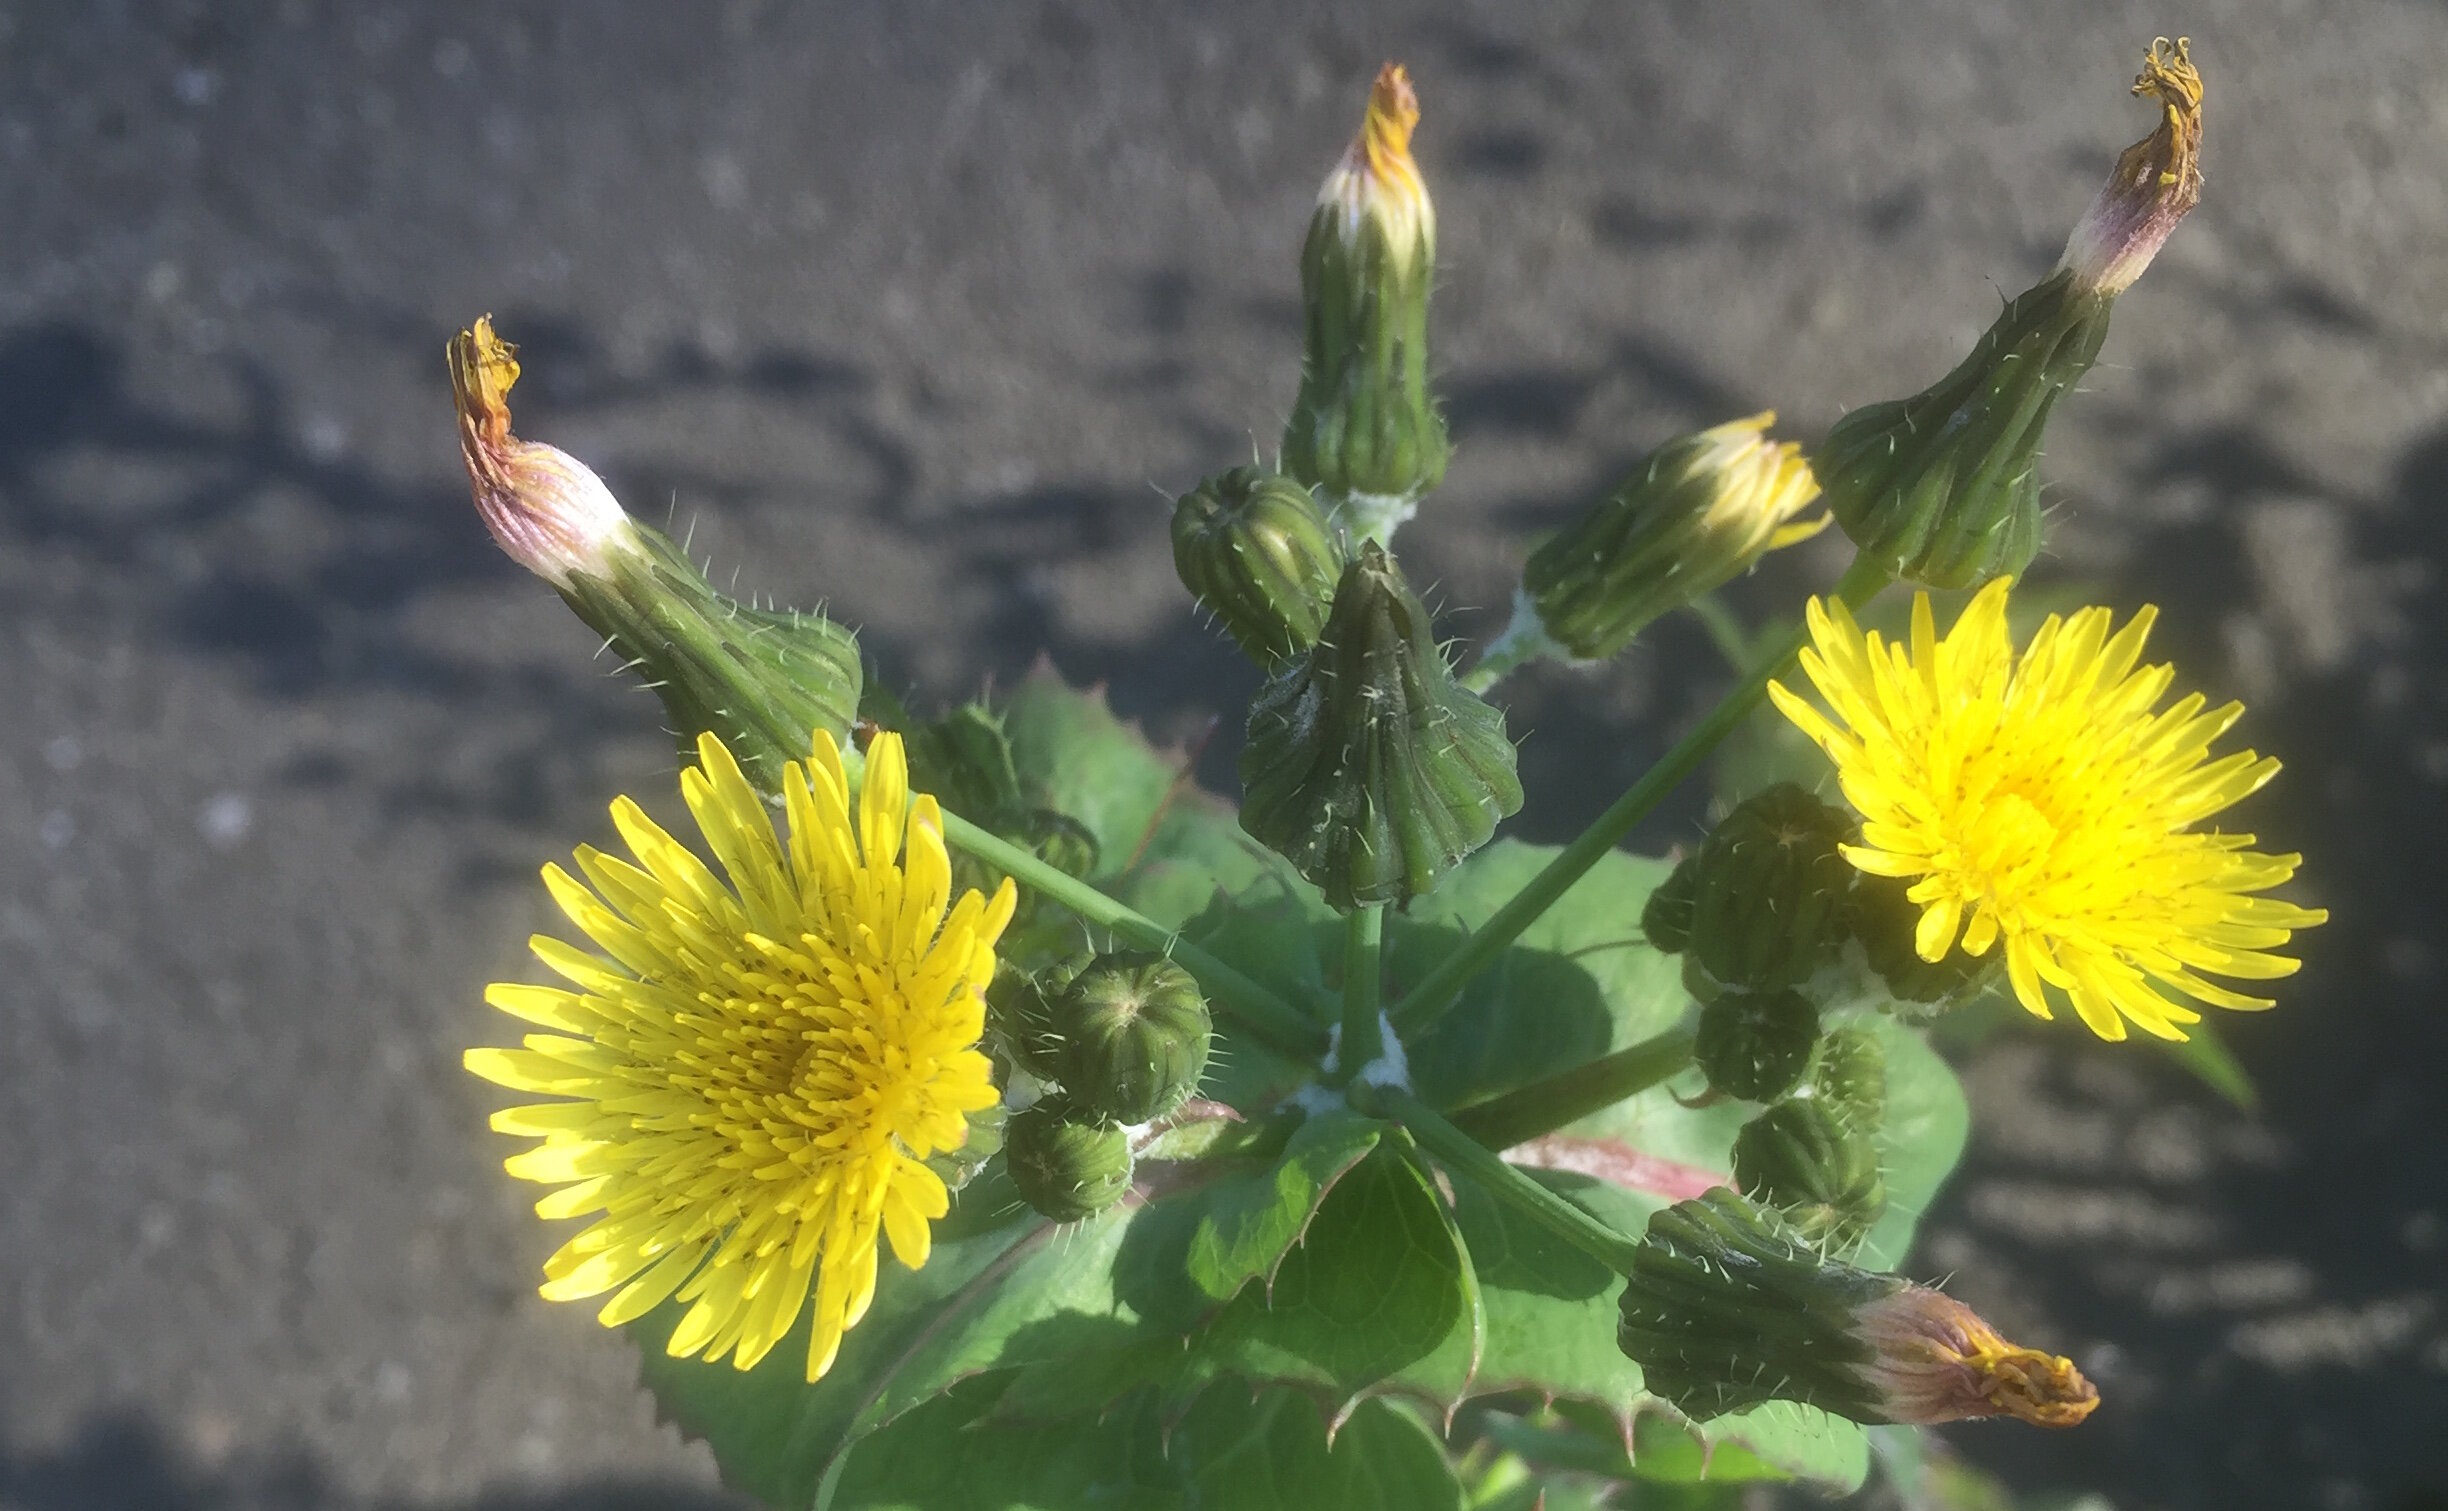 Image of Yellow thistle weed free to use